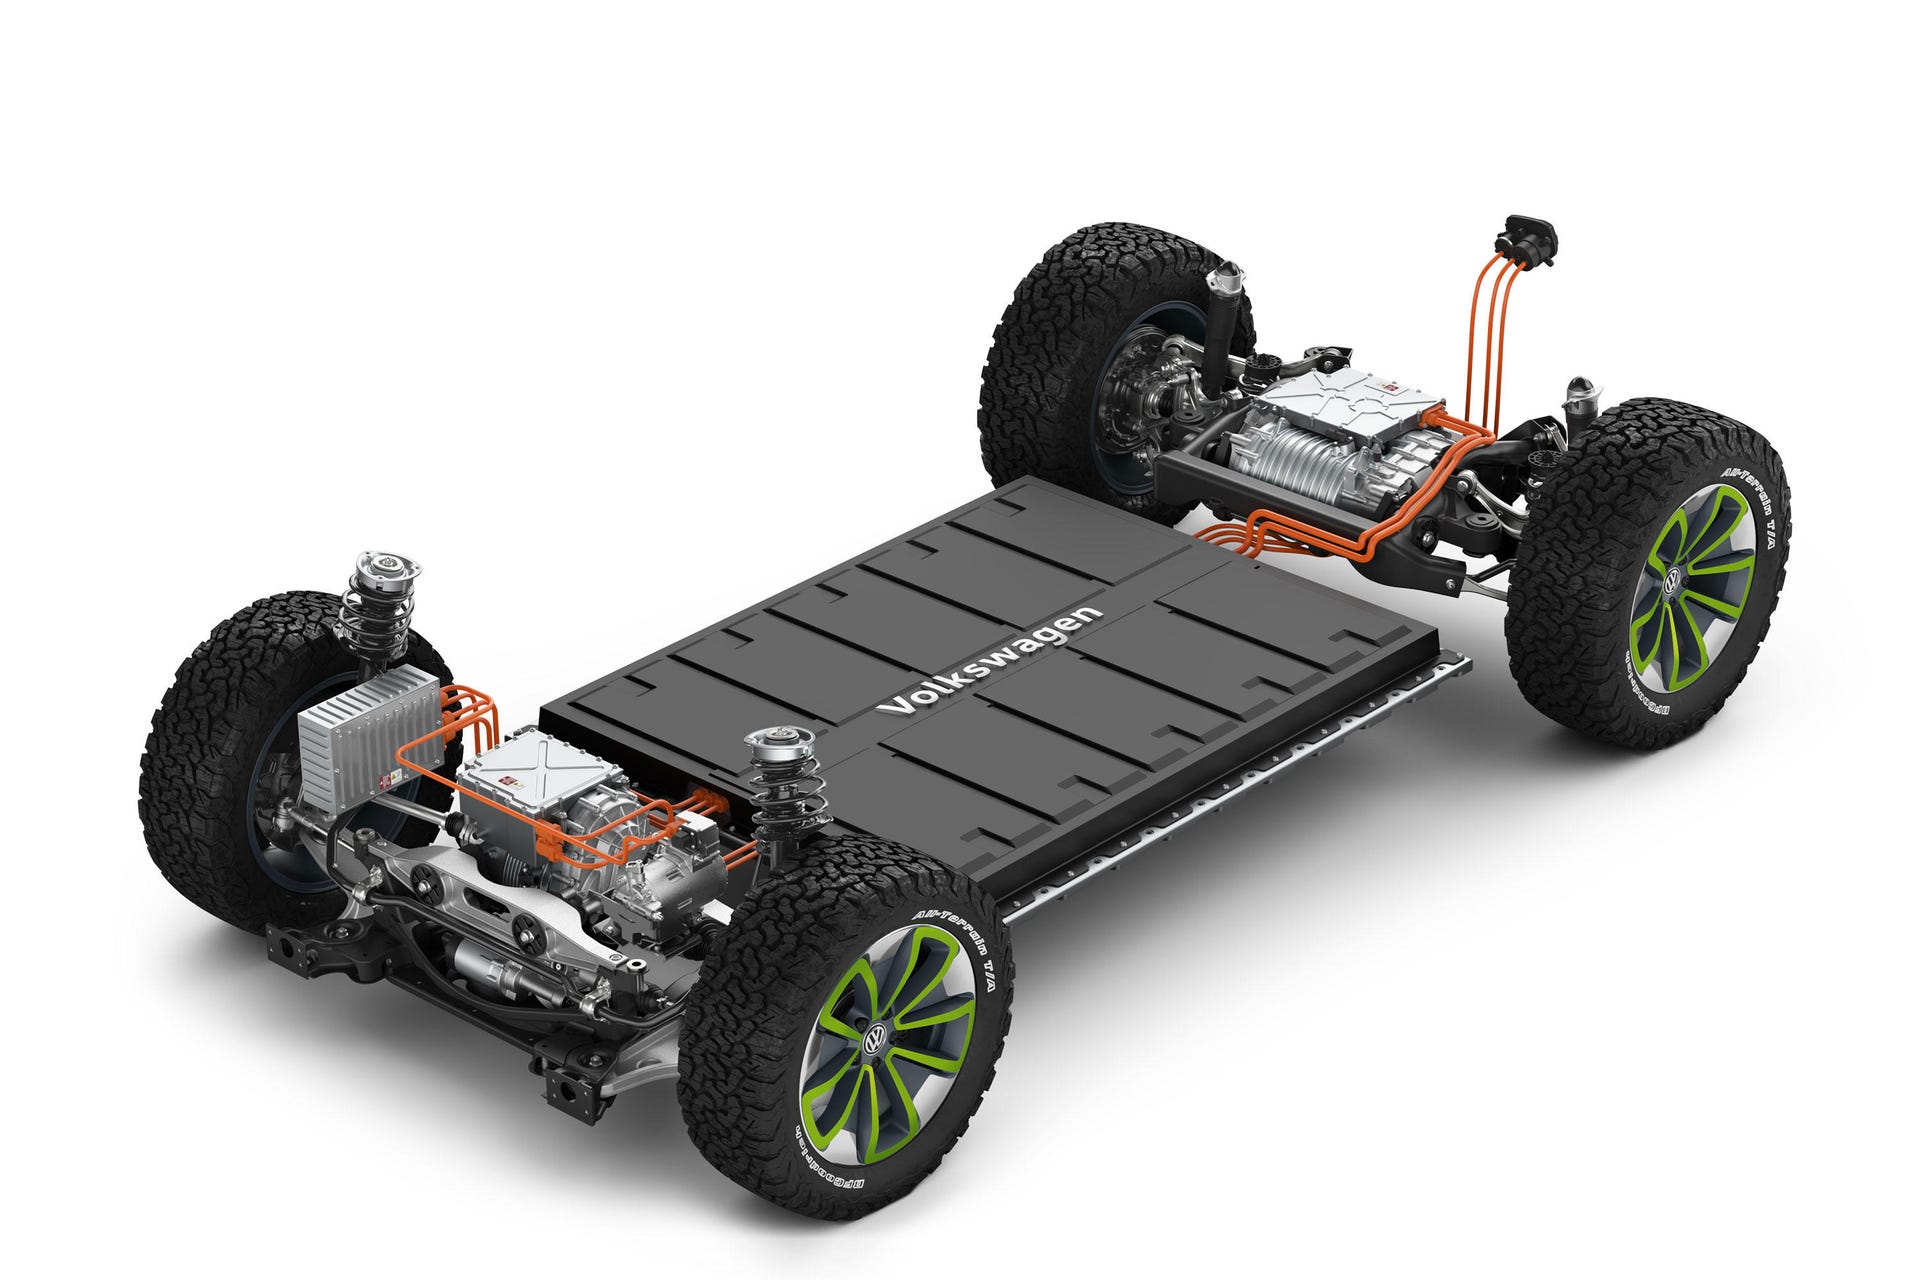 Volkswagen I.D. Buggy MEB chassis